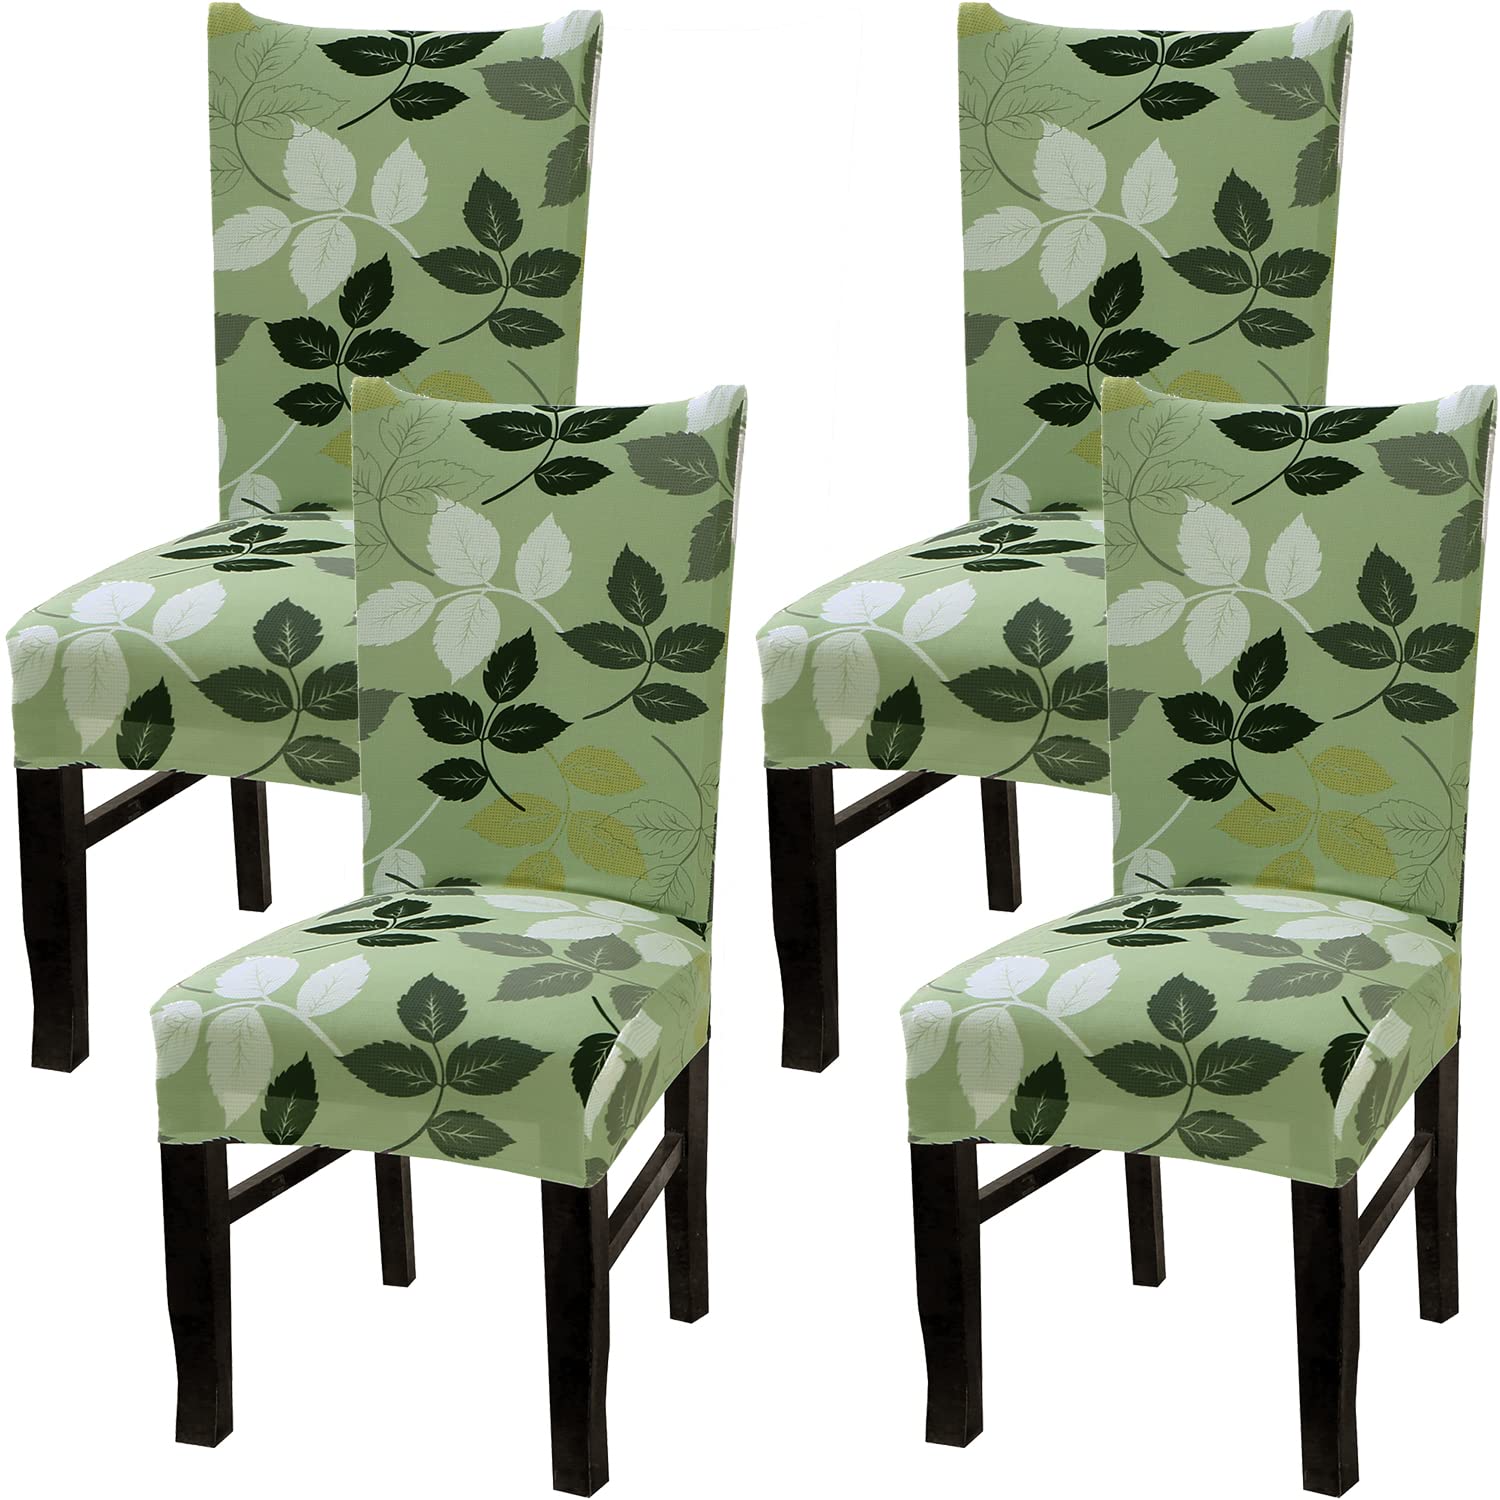 Yiaizhuo chair covers for Dining Room Set of 4 Pack Slipcovers High Back chairs cover Stretch Slipcover Leaf green